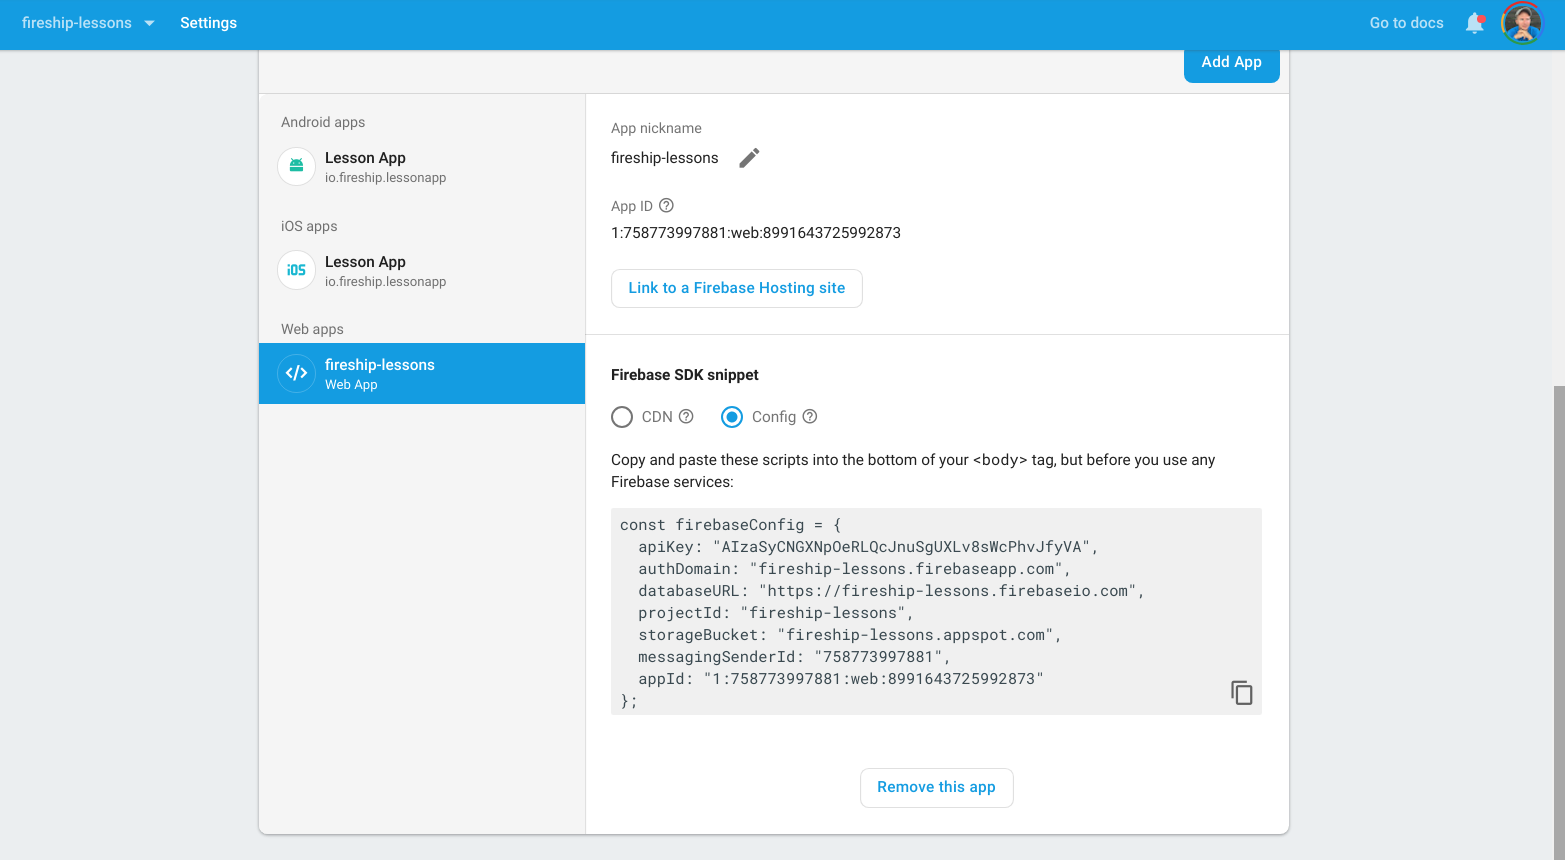 Make sure you have the new Firebase config object with an appId property